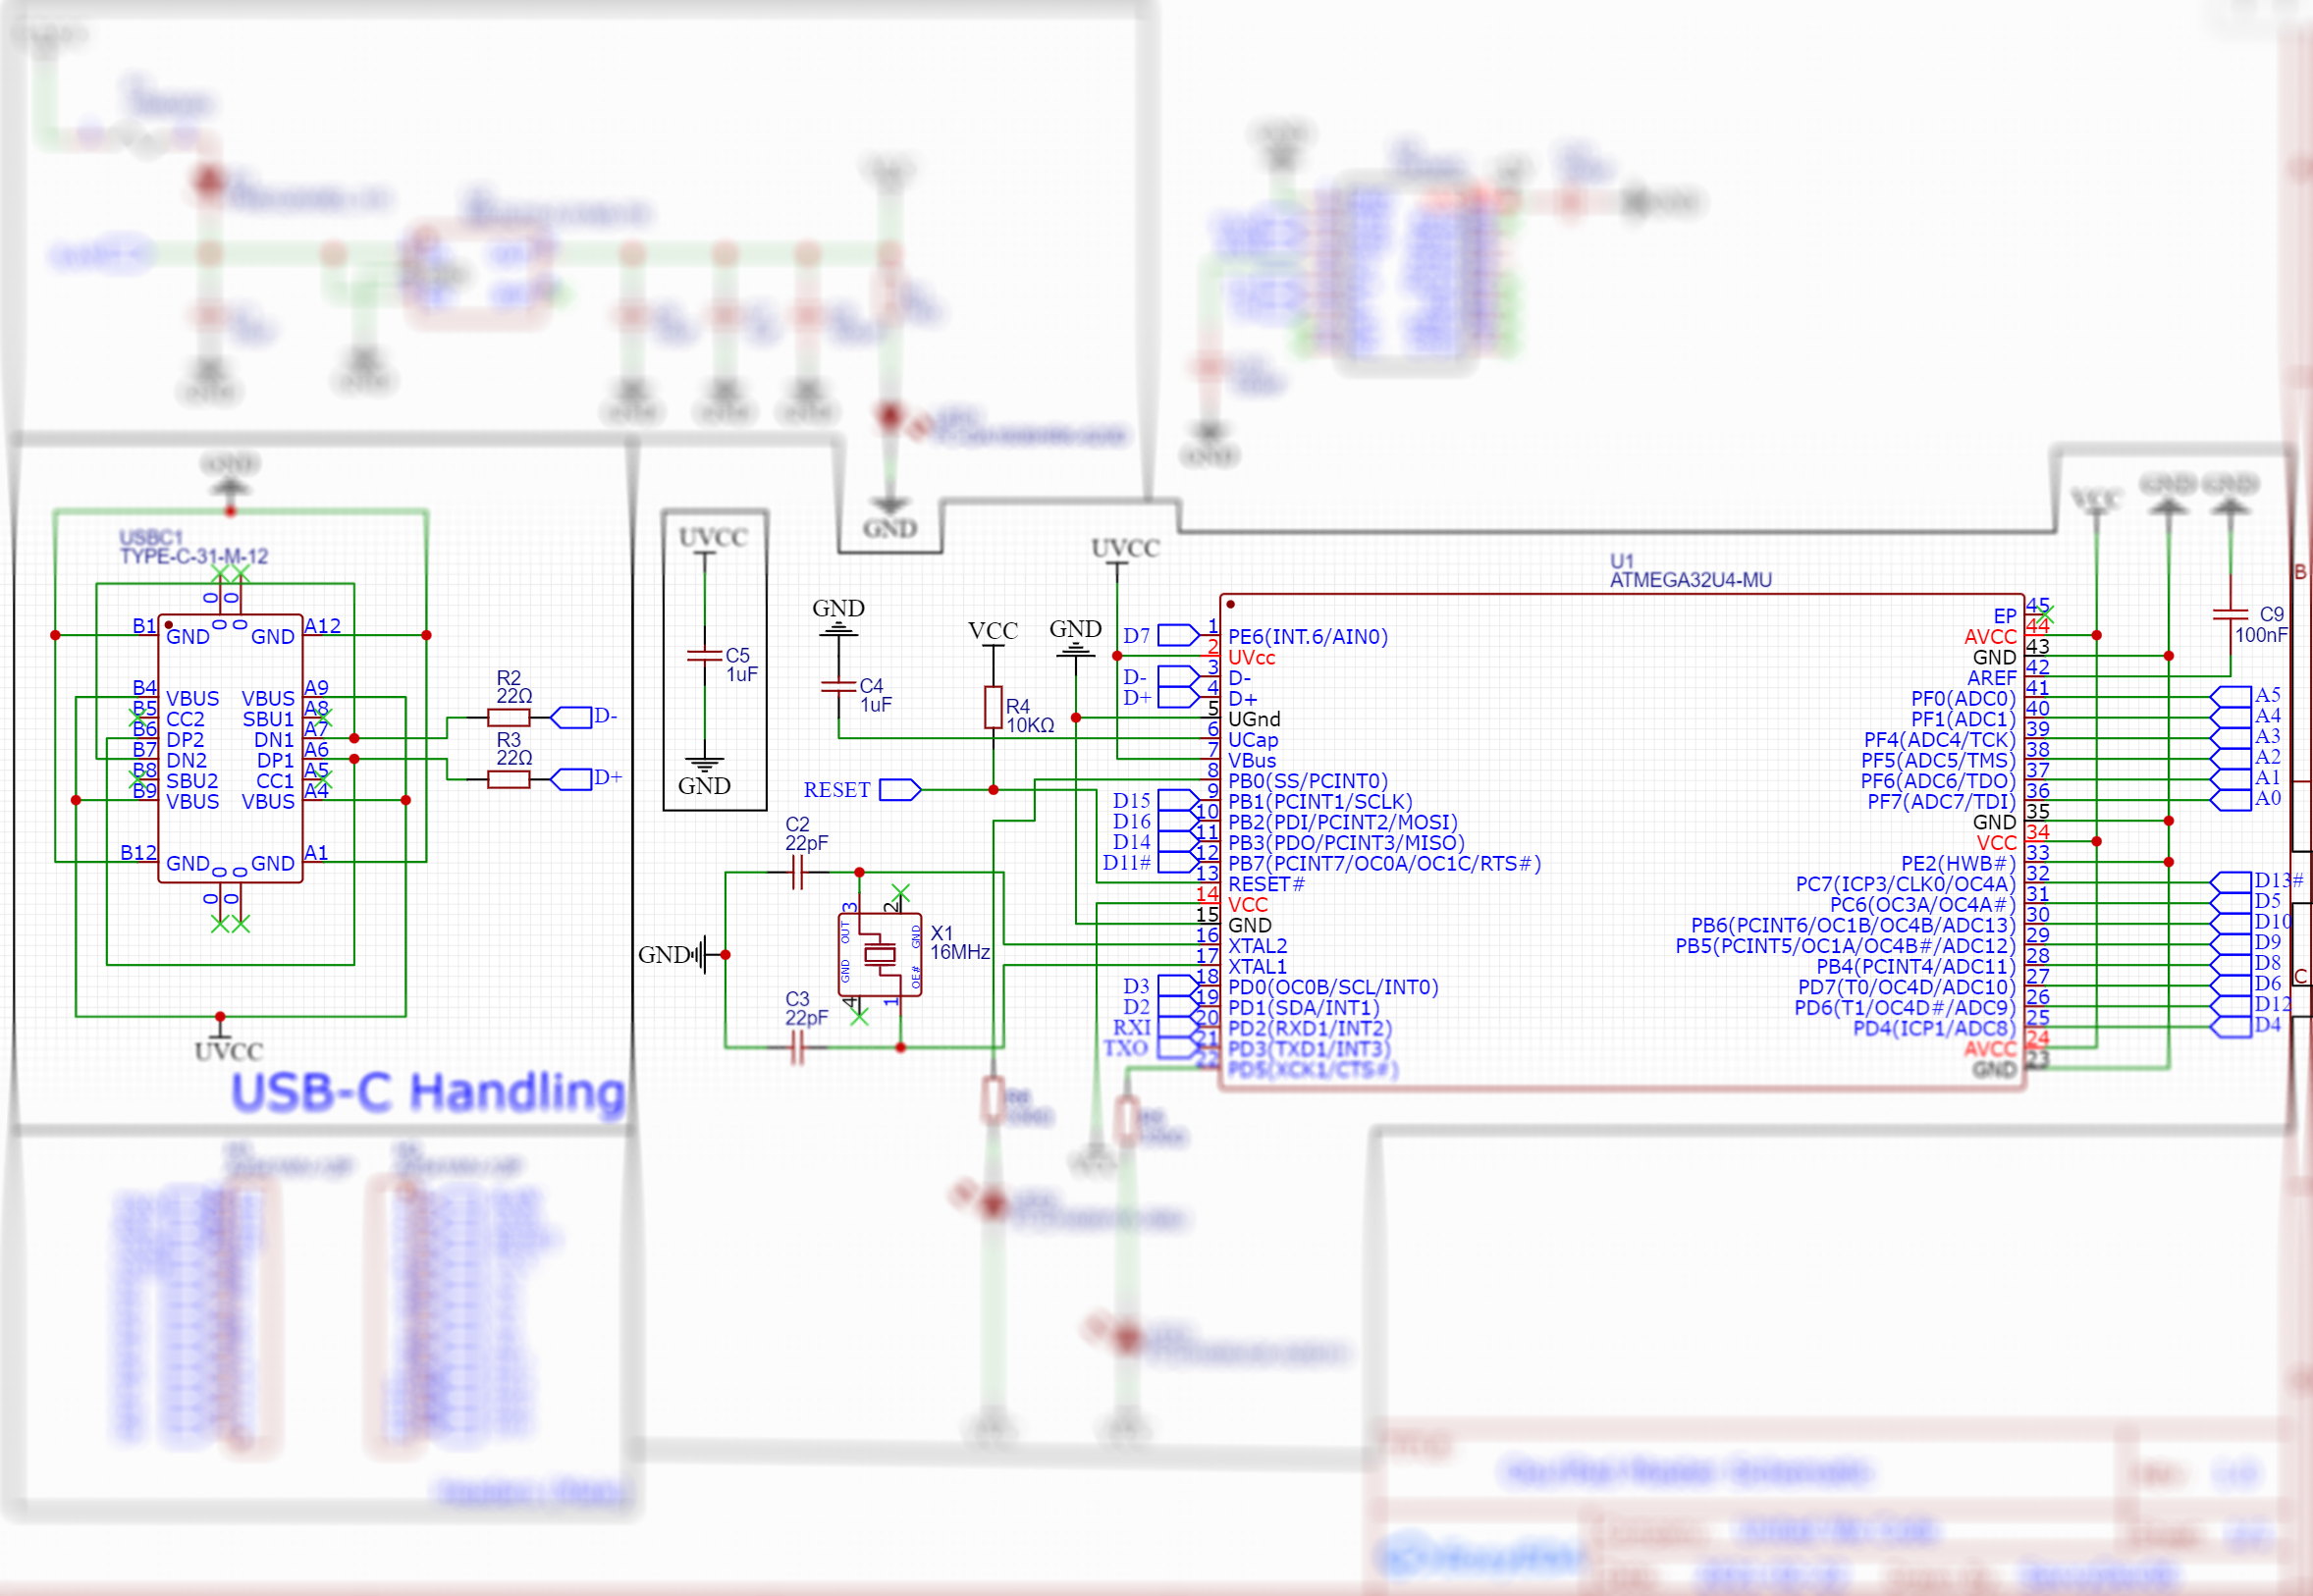 The in-development schematic of the new board (with the ATMEGA 32U4-MU Microcontroller built-in)